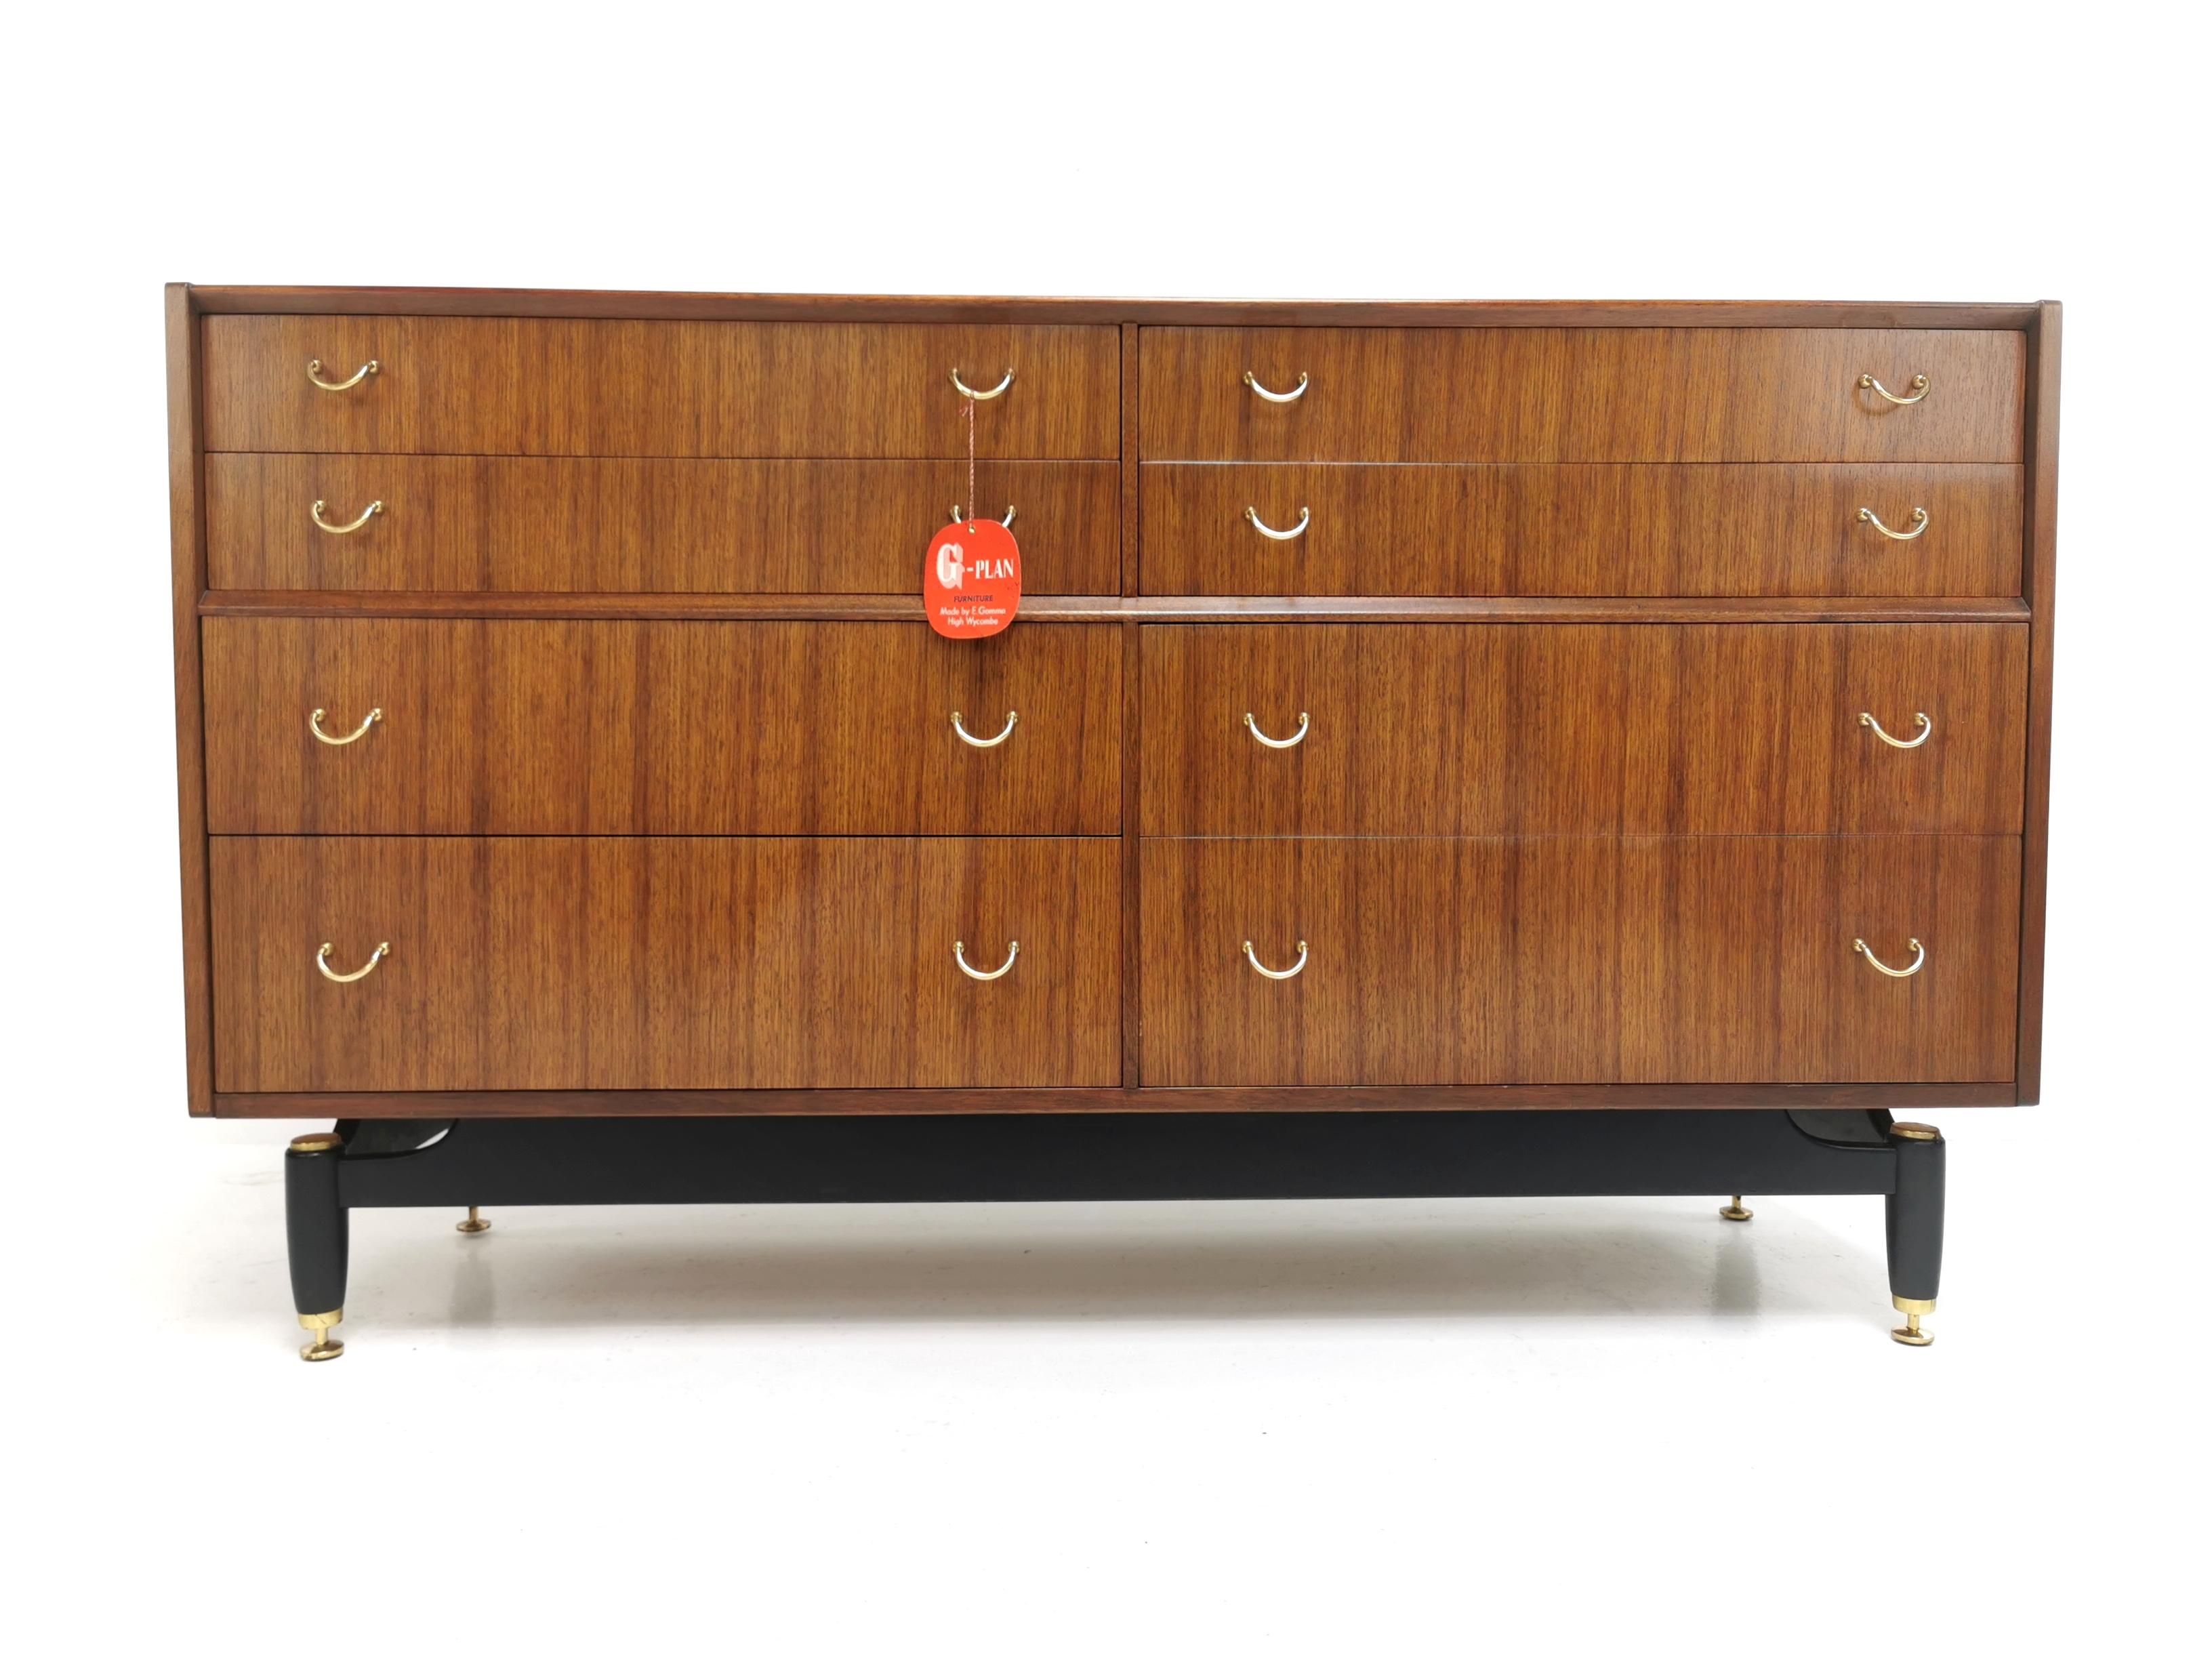 G Plan chest of drawers

A chest of eight drawers raised on an ebonized base with brass cup feet with original brass drawer pulls. 

Manufactured by Ernest Gomme, G Plan as part of the “Tola” range.

Includes the original g plan tag,

circa